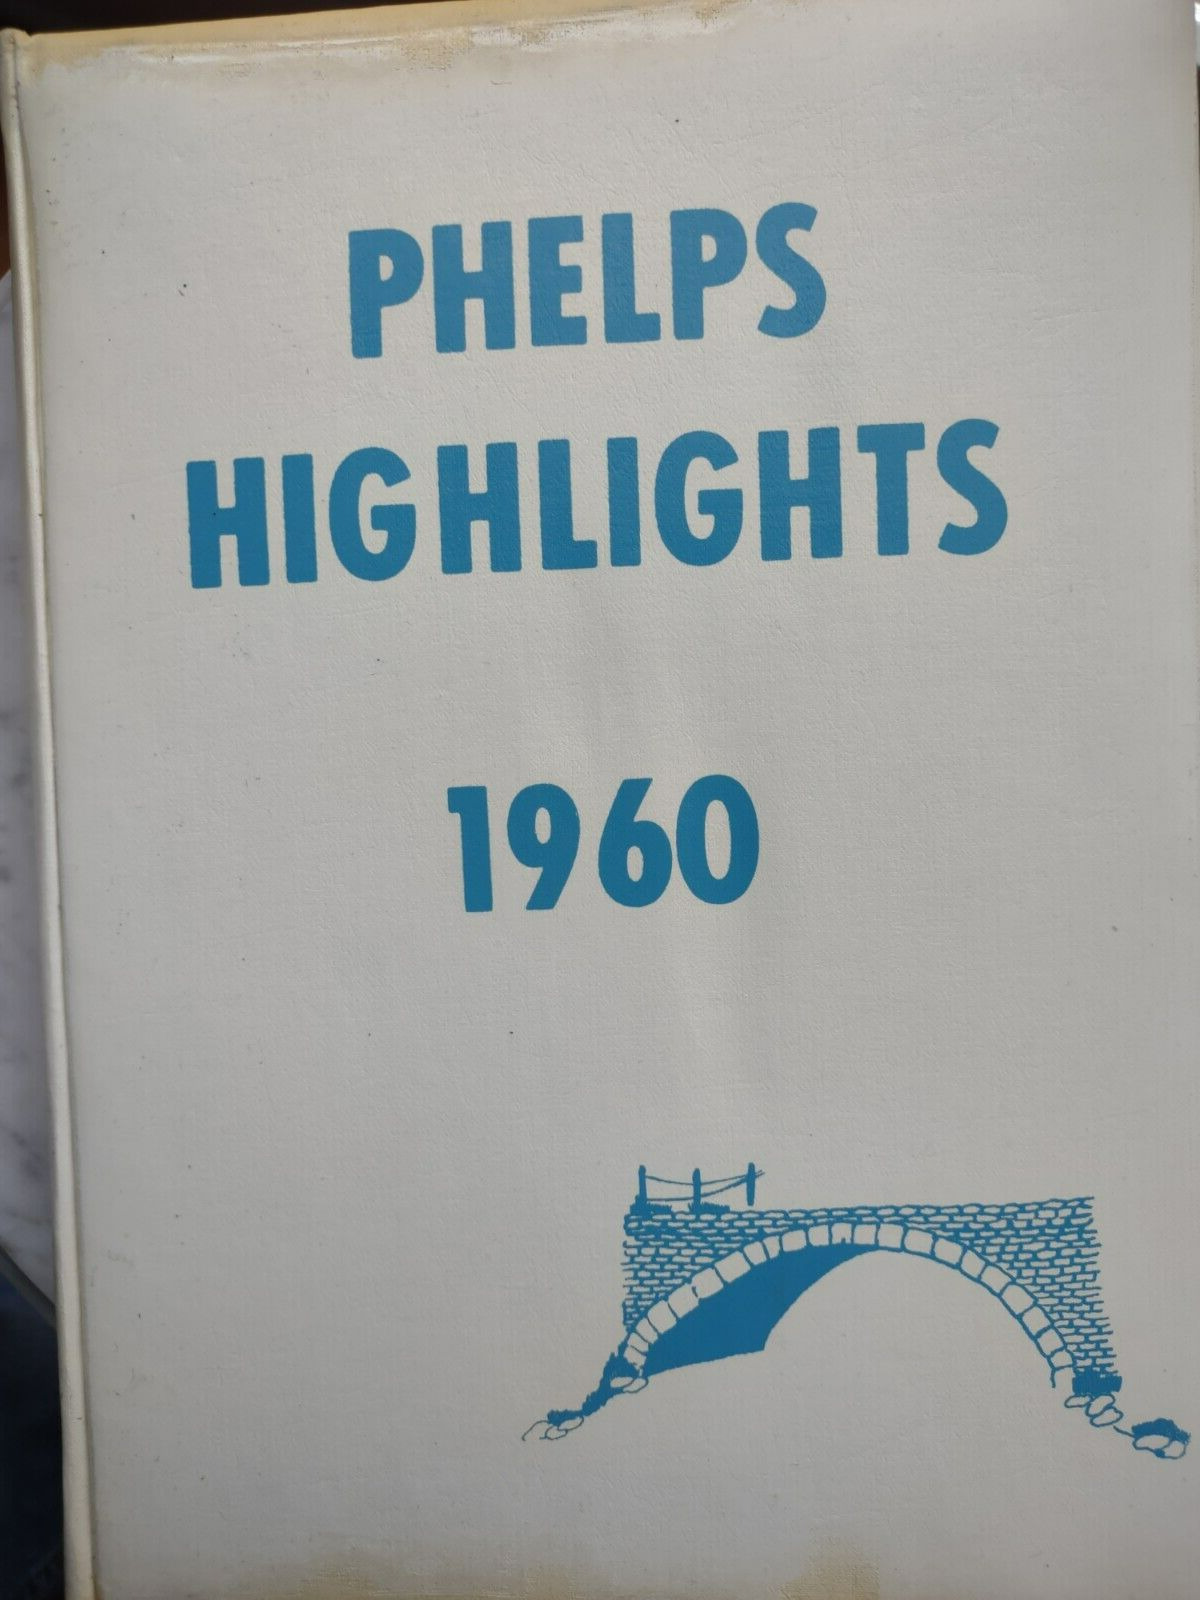 1960 Phelps NY Central High School Yearbook - PHELPS HIGHLIGHTS